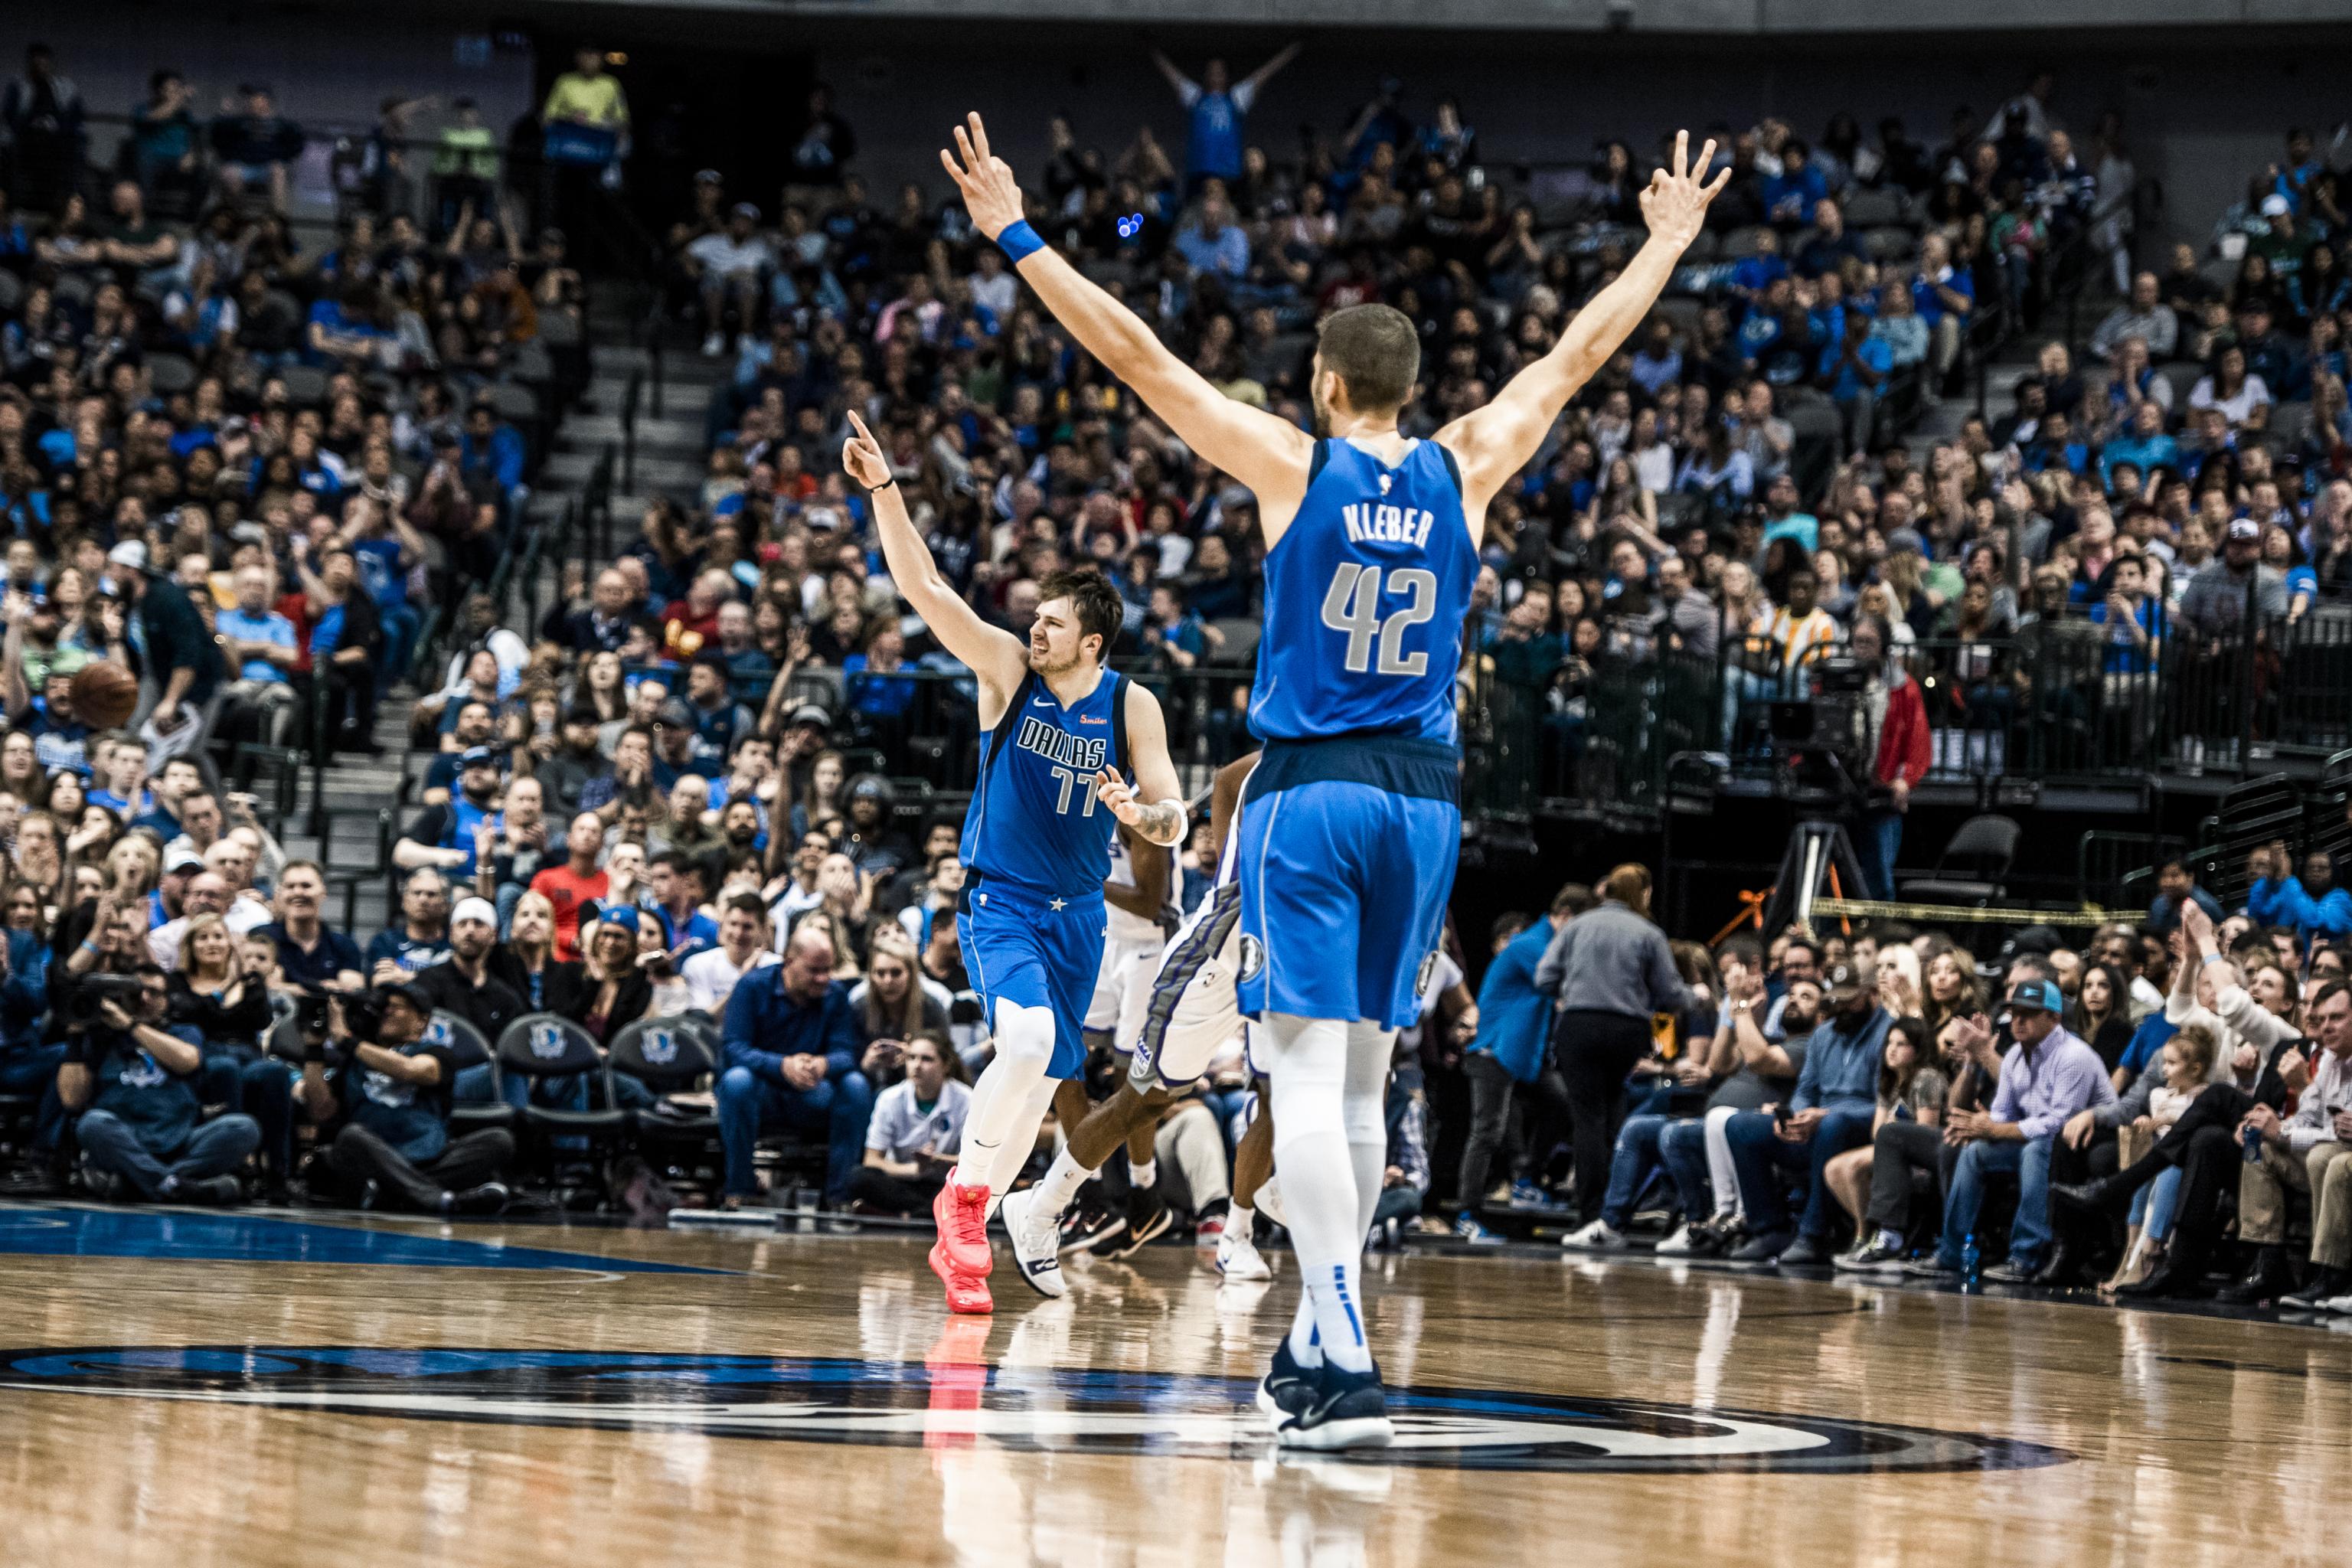 Maxi Kleber signs 4-year contract with Dallas